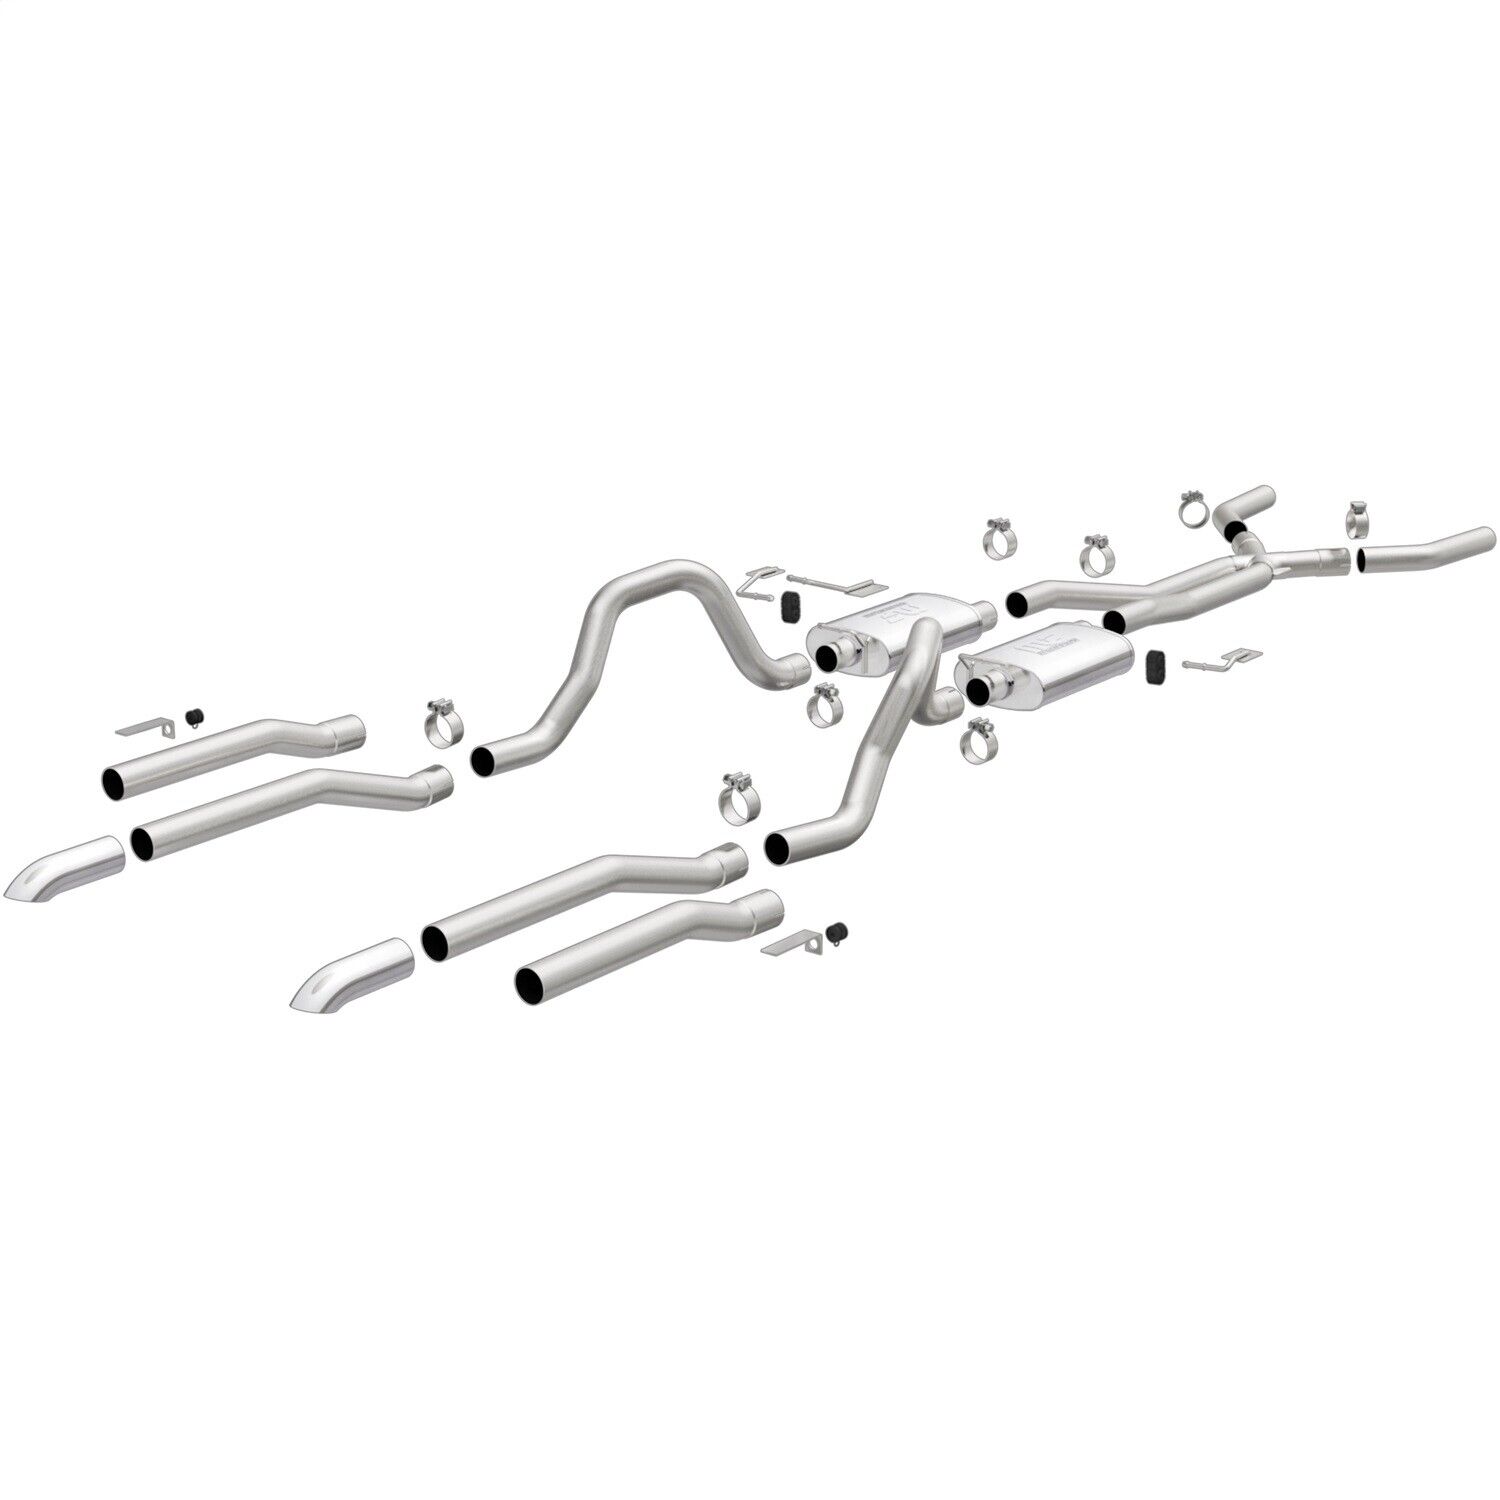 Magnaflow Performance Exhaust 19303 Exhaust System Kit